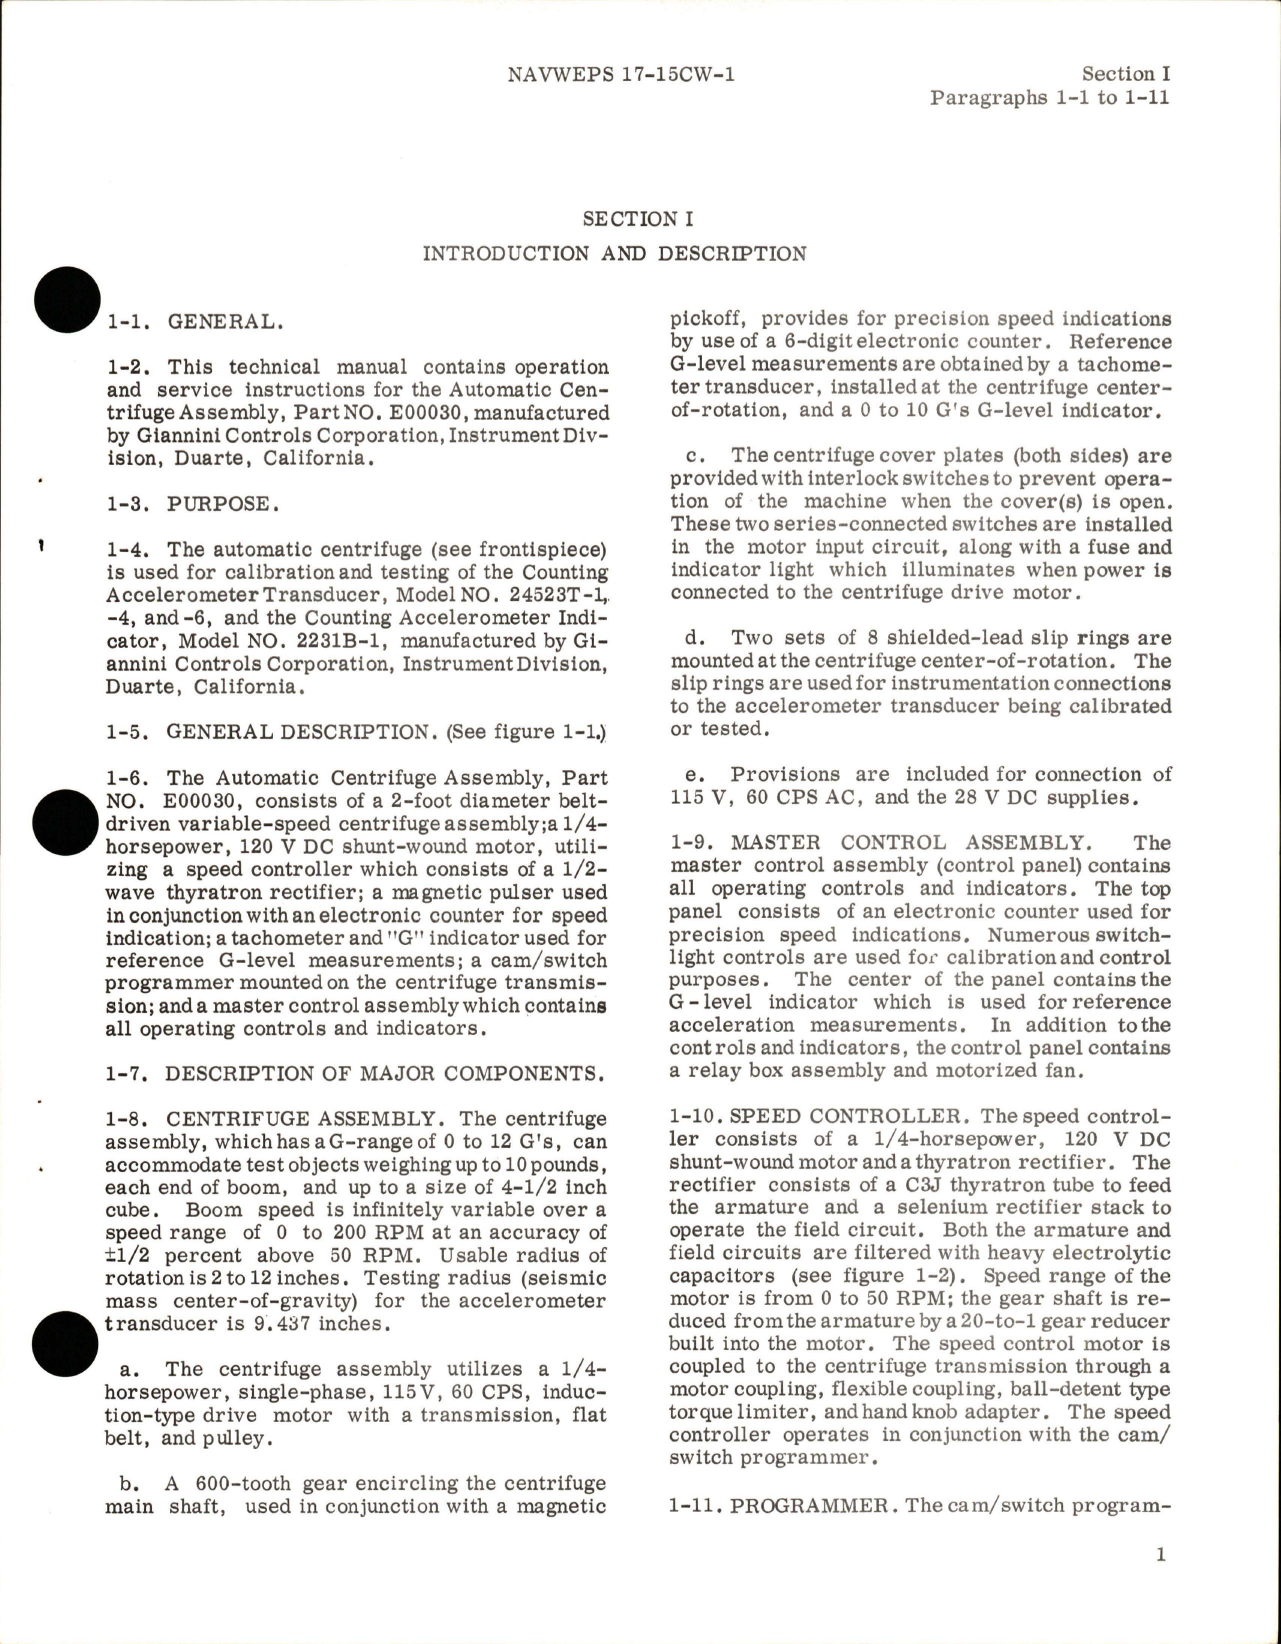 Sample page 7 from AirCorps Library document: Operation, Service Instructions for Automatic Centrifuge - Part E00030 